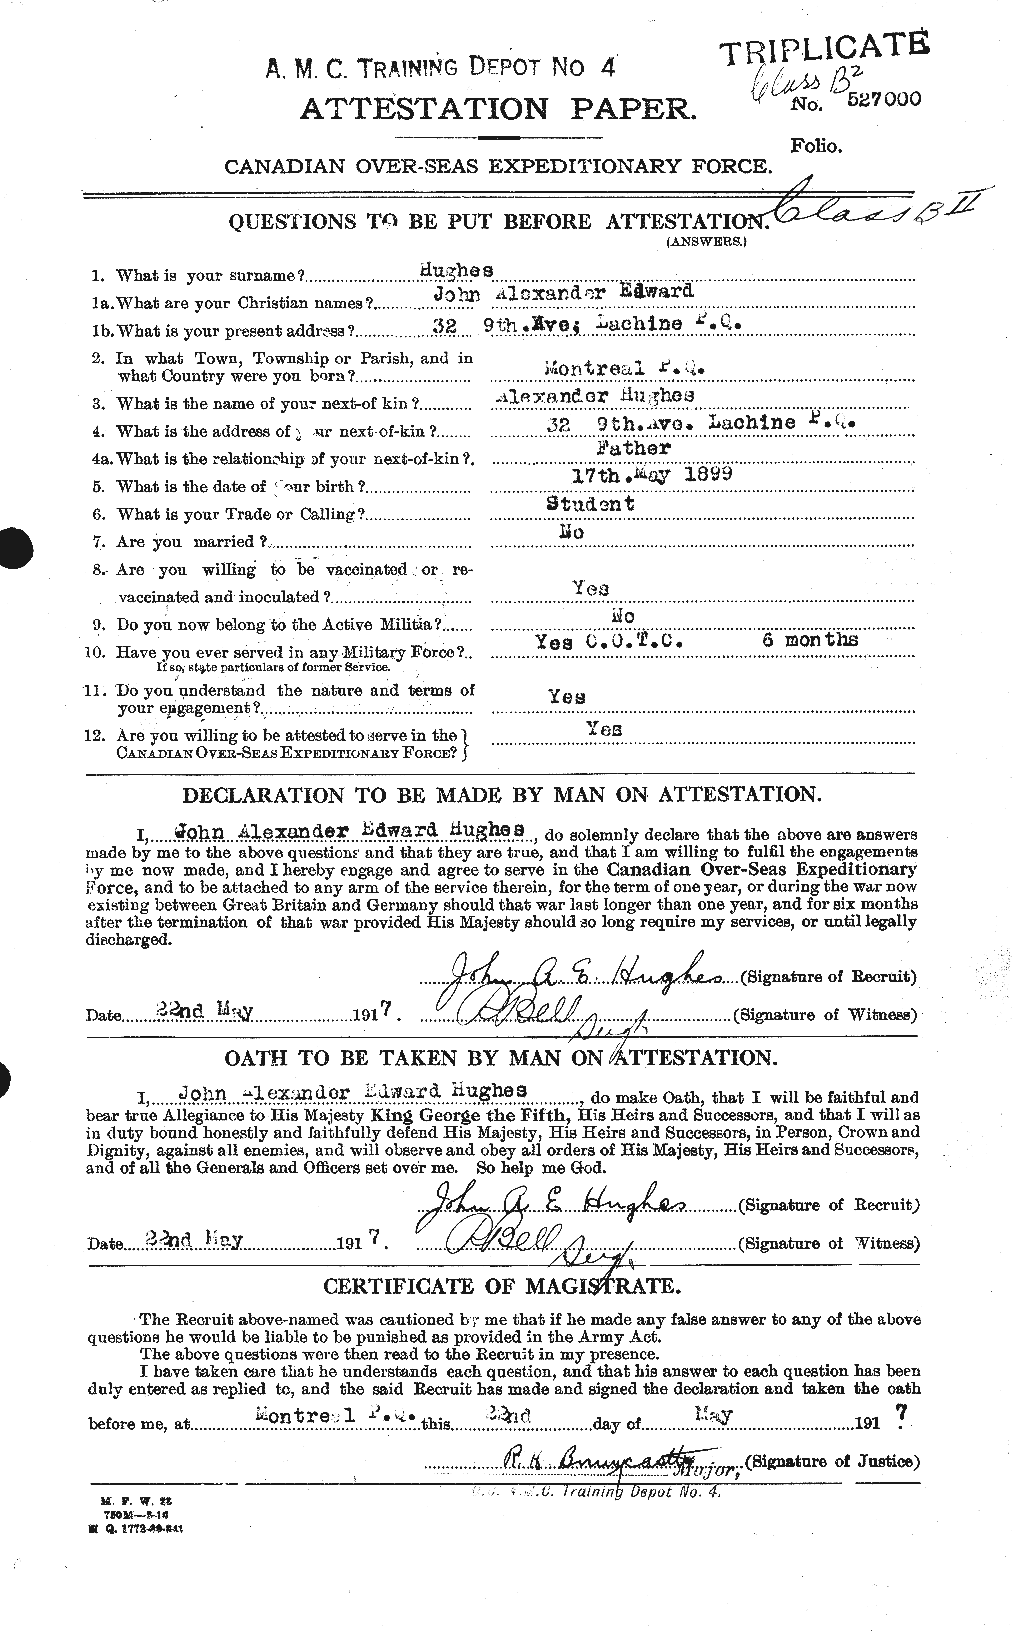 Personnel Records of the First World War - CEF 404005a